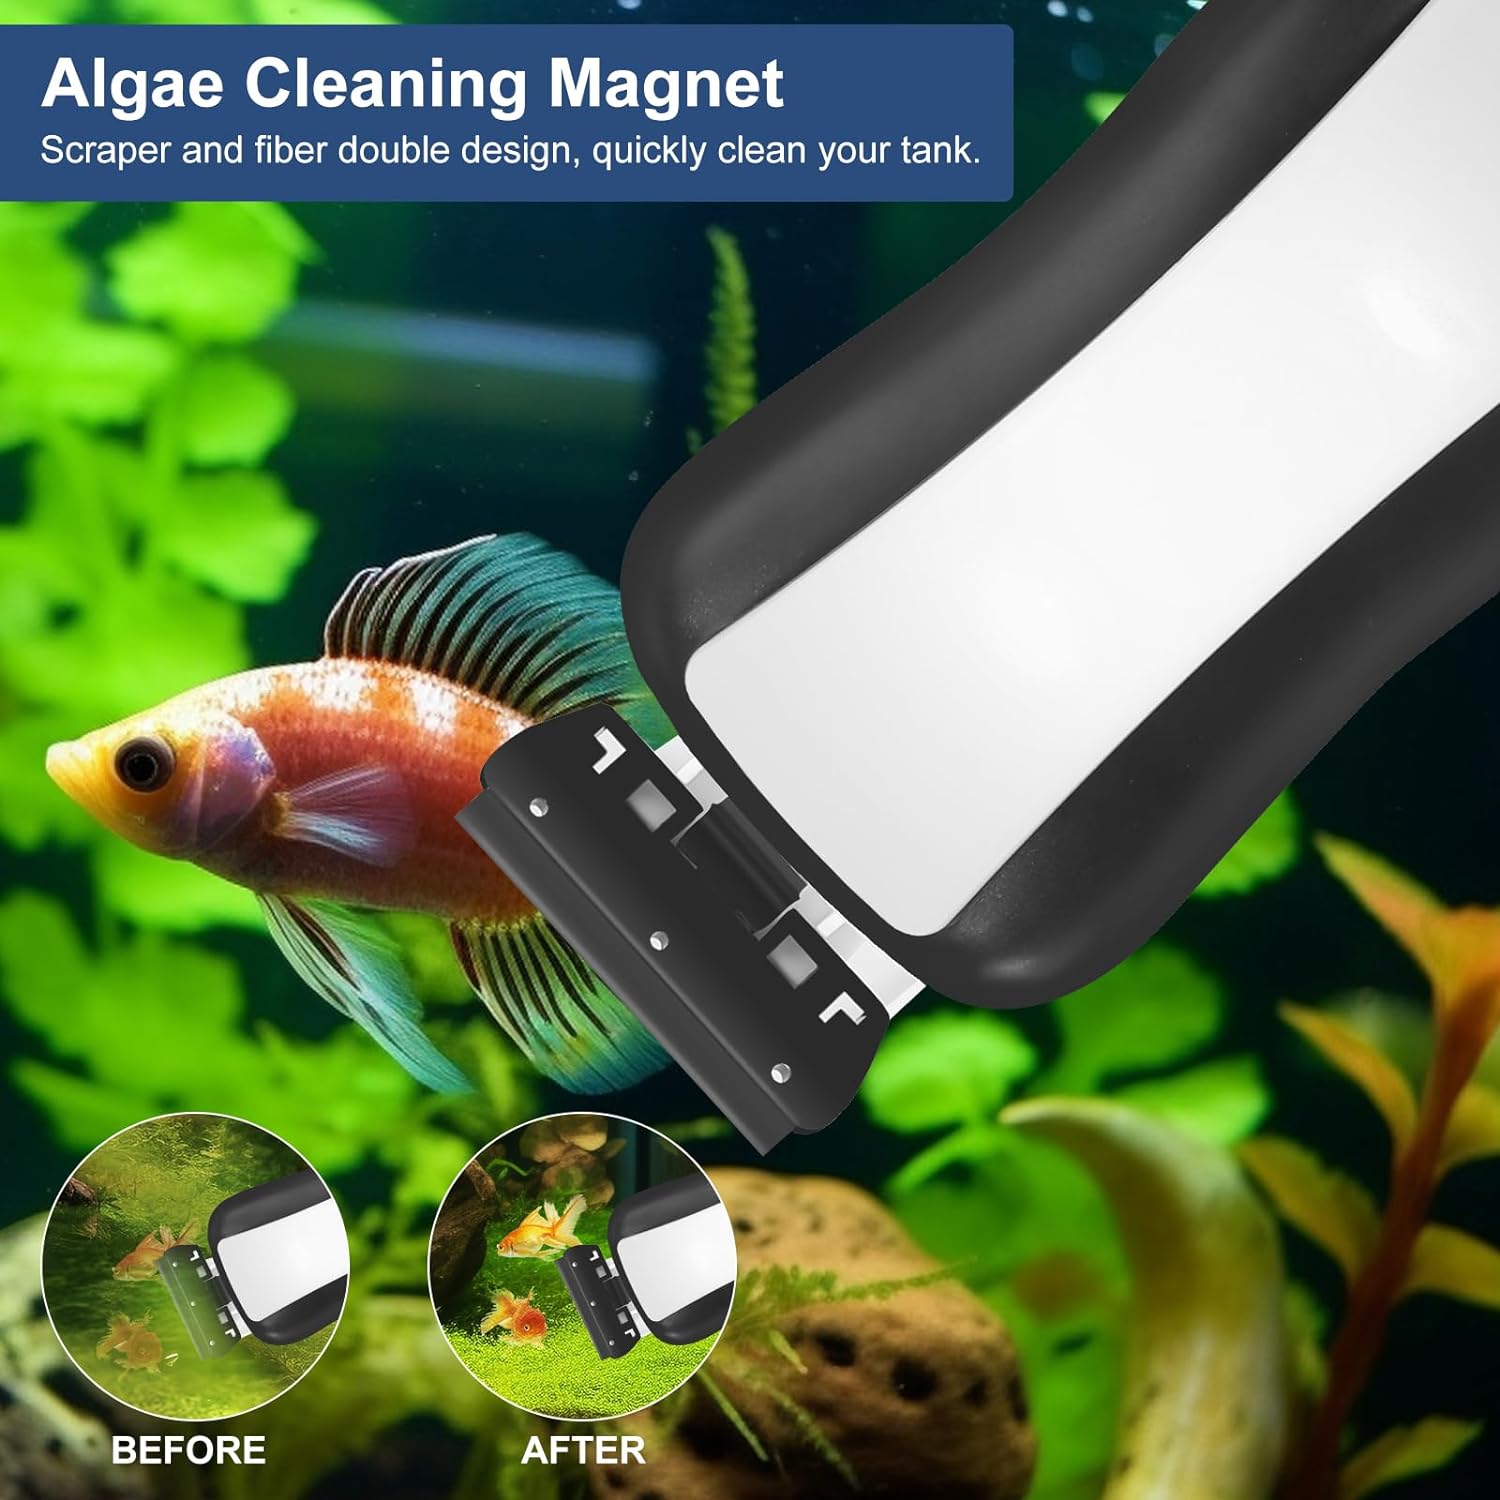 Magnetic Aquarium Strong Cleaner Brush, Fish Tank Glass Algae Magnet Cleaning Tool Floating Cleaner Scrubber Brush with Handle Design (M up to 1/5" 6MM)